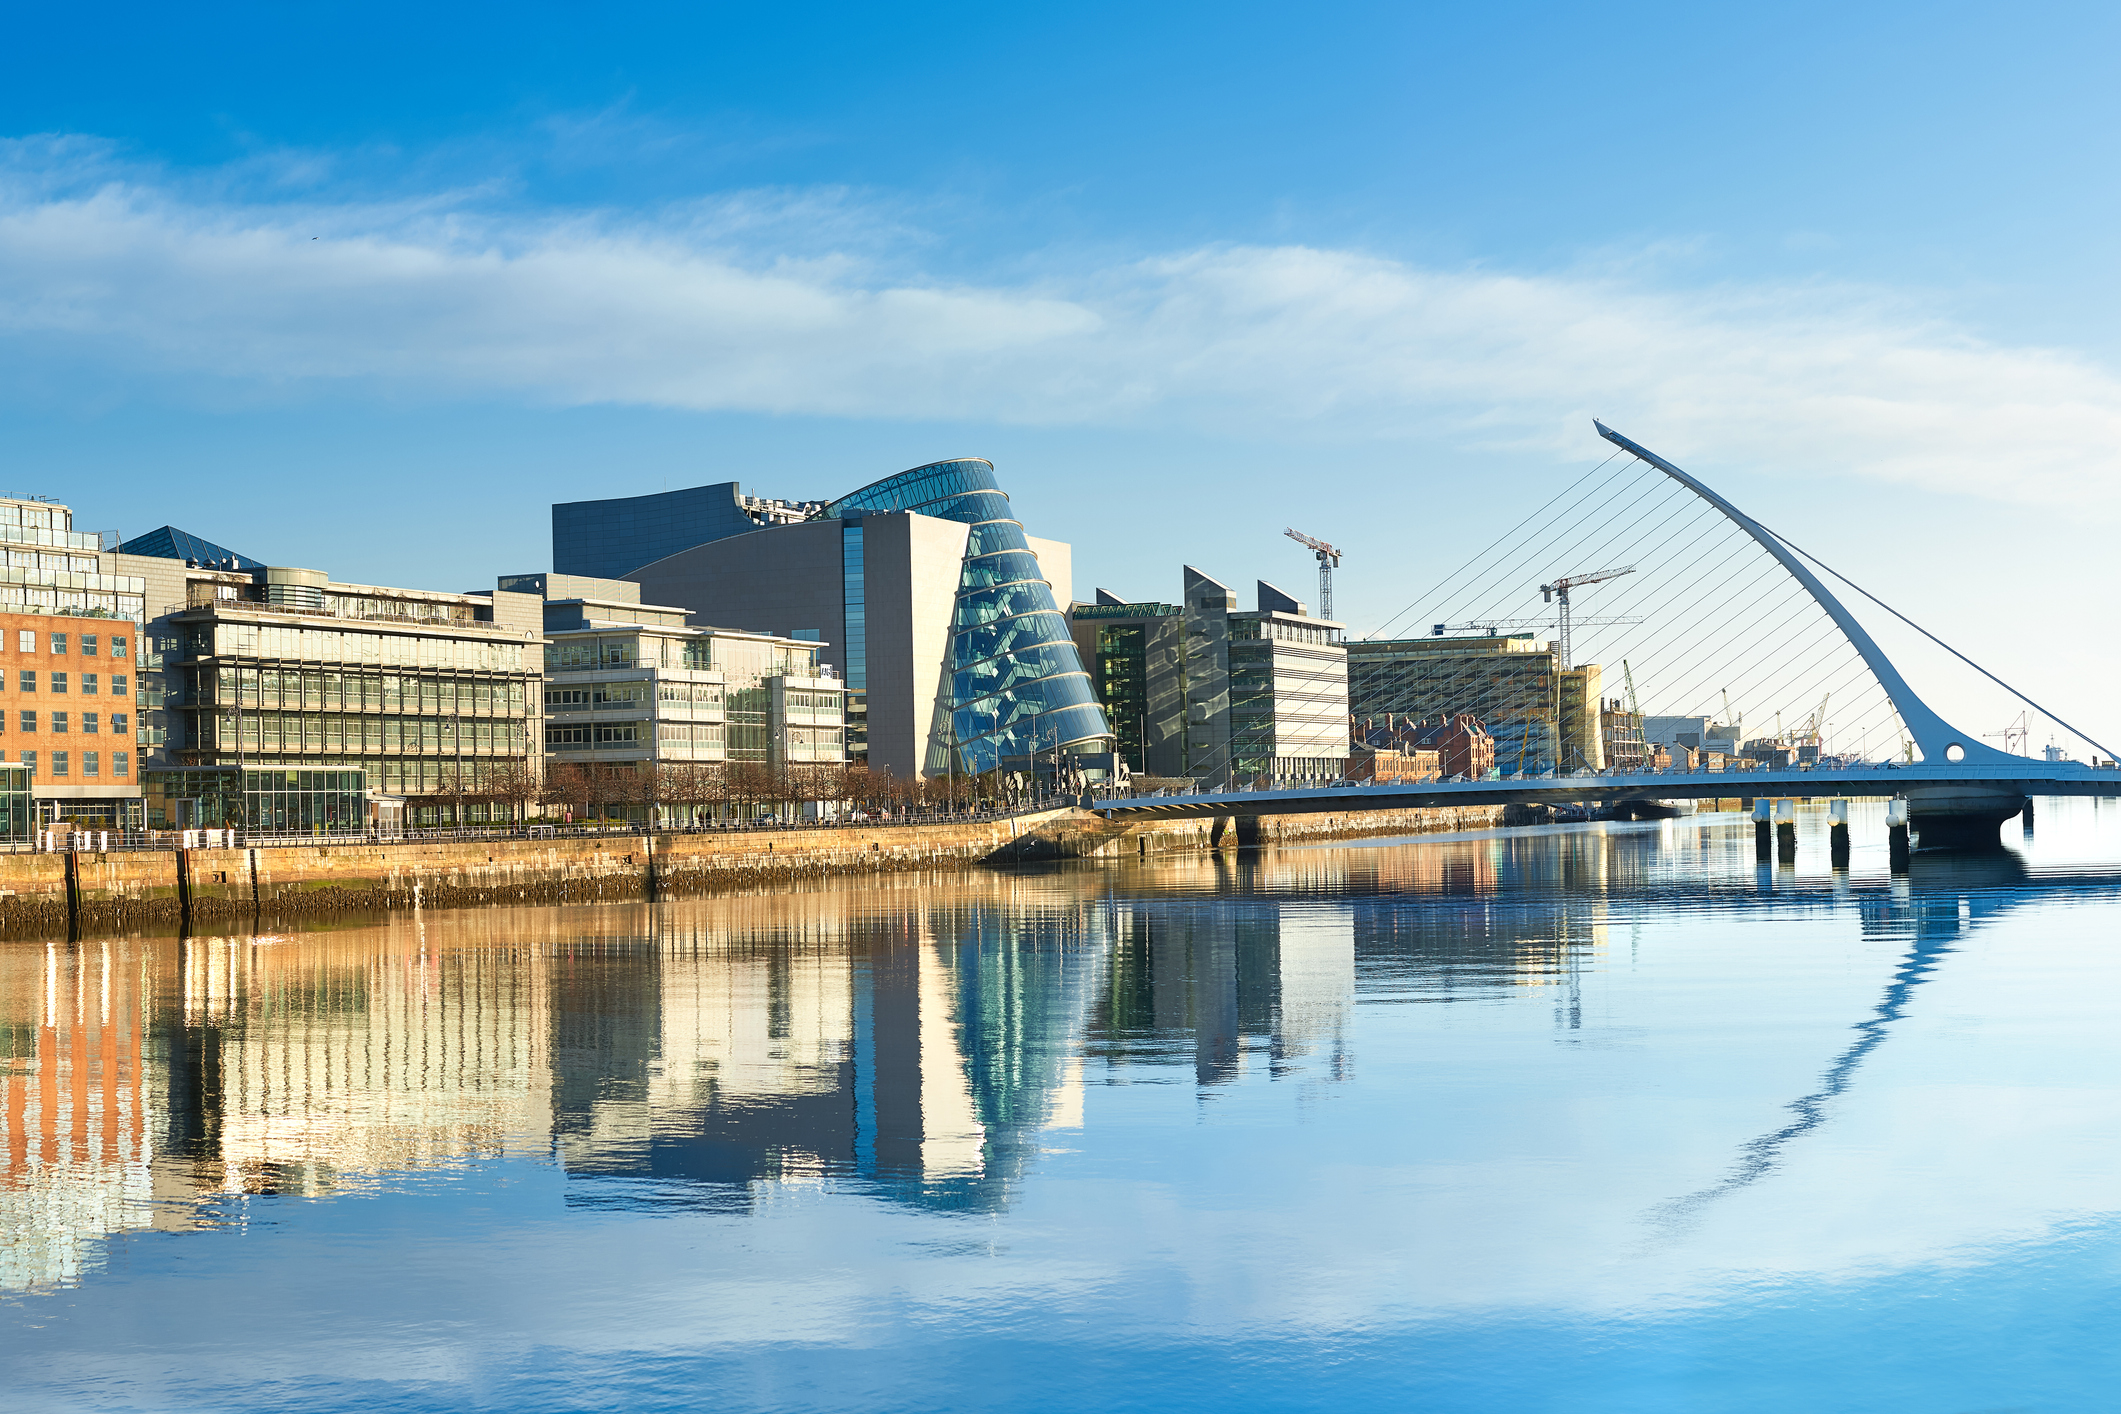 A view of Dublin's Convention Centre and Samuel Beckett Bridge from across the Liffey